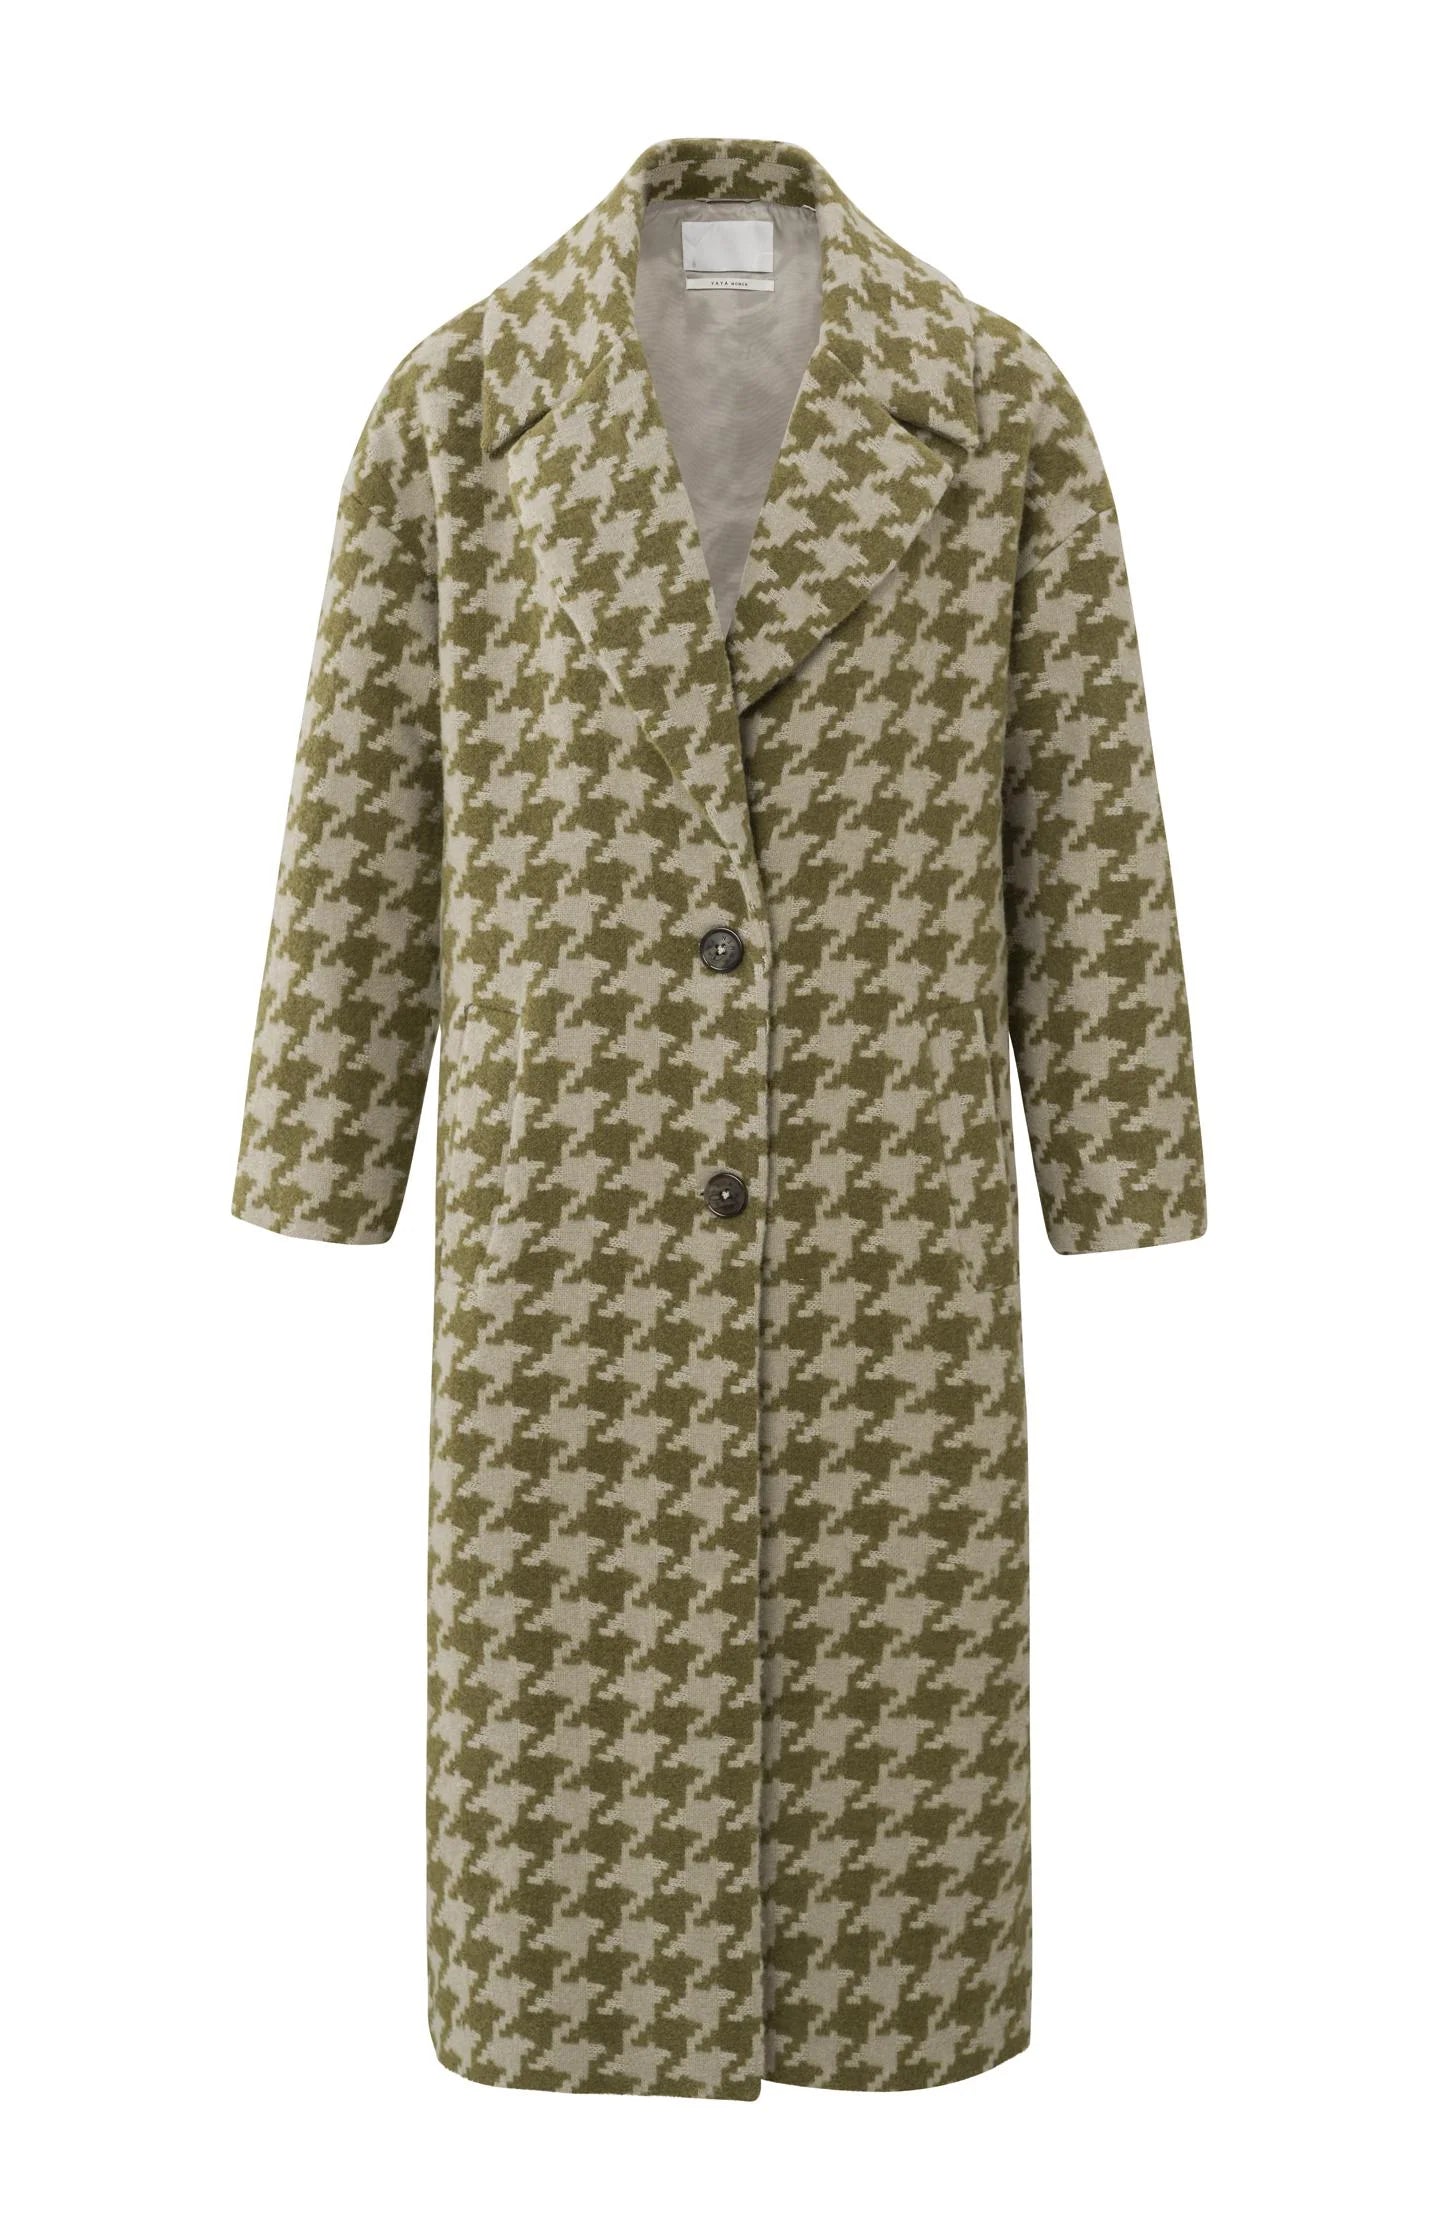 Gothic Olive Green Houndstooth coat with long sleeves, pockets and buttons